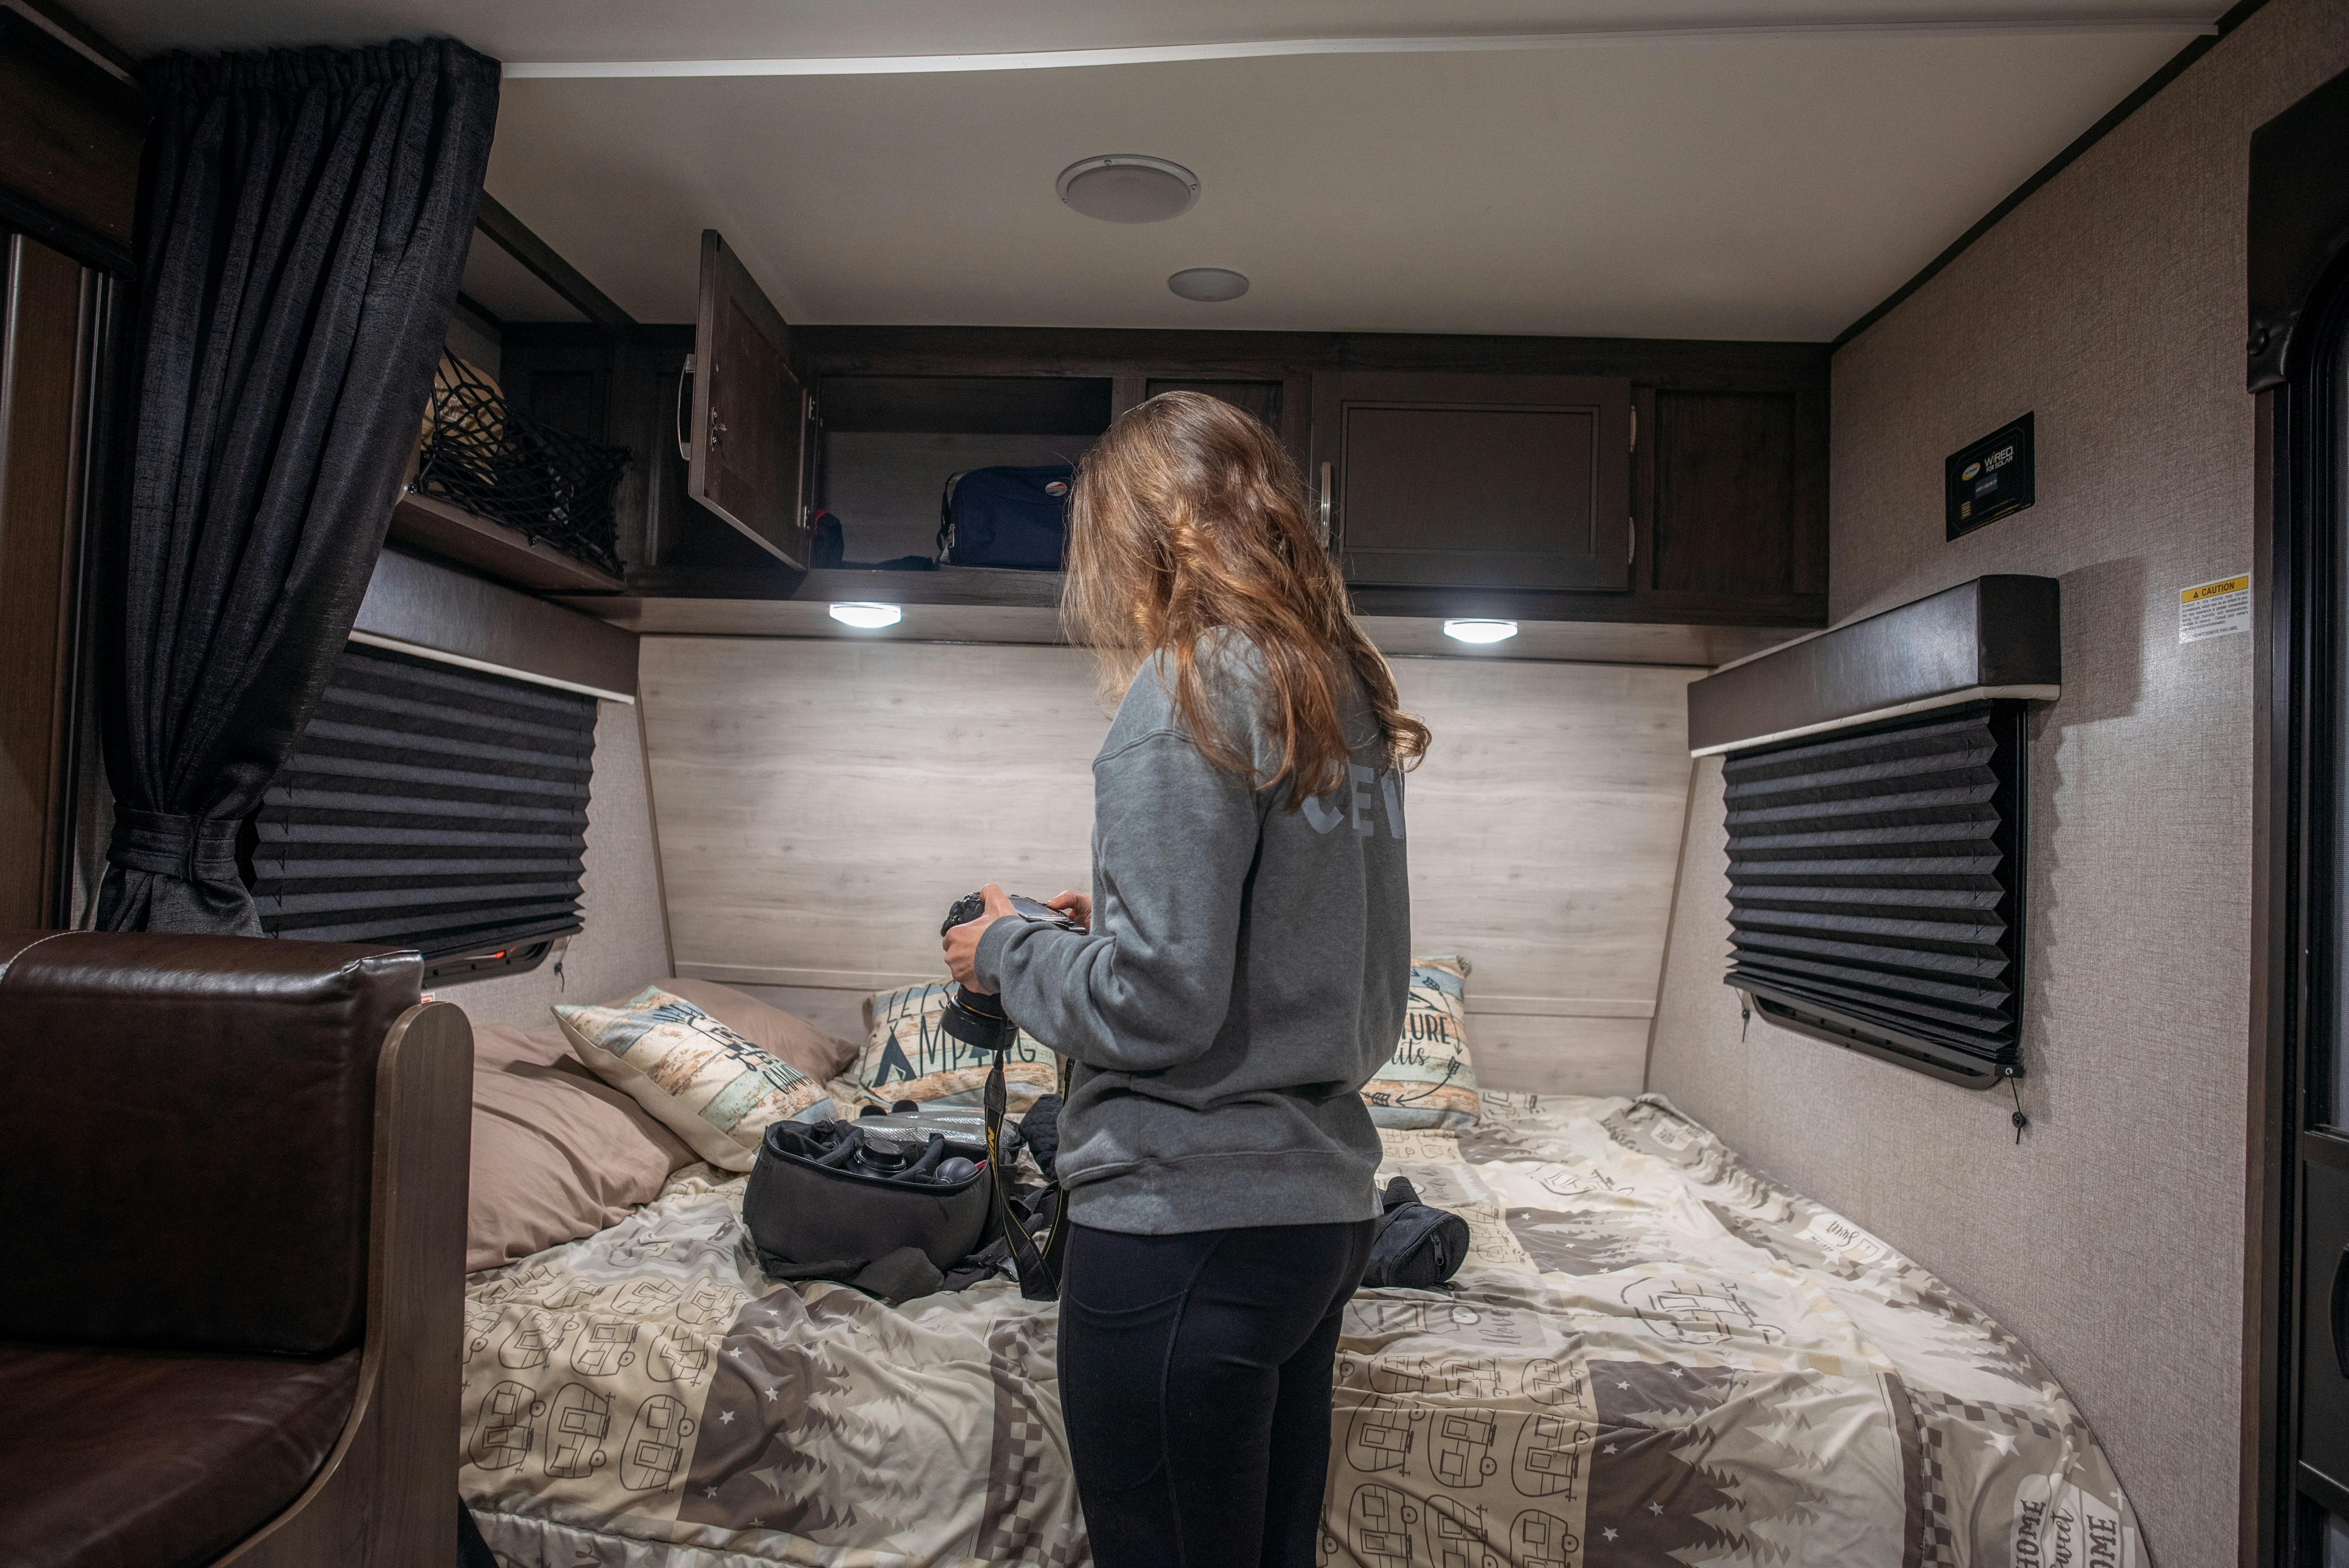 Alison Takacs organizes her camera equipment in the bedroom of her Jayco Jay Flight.